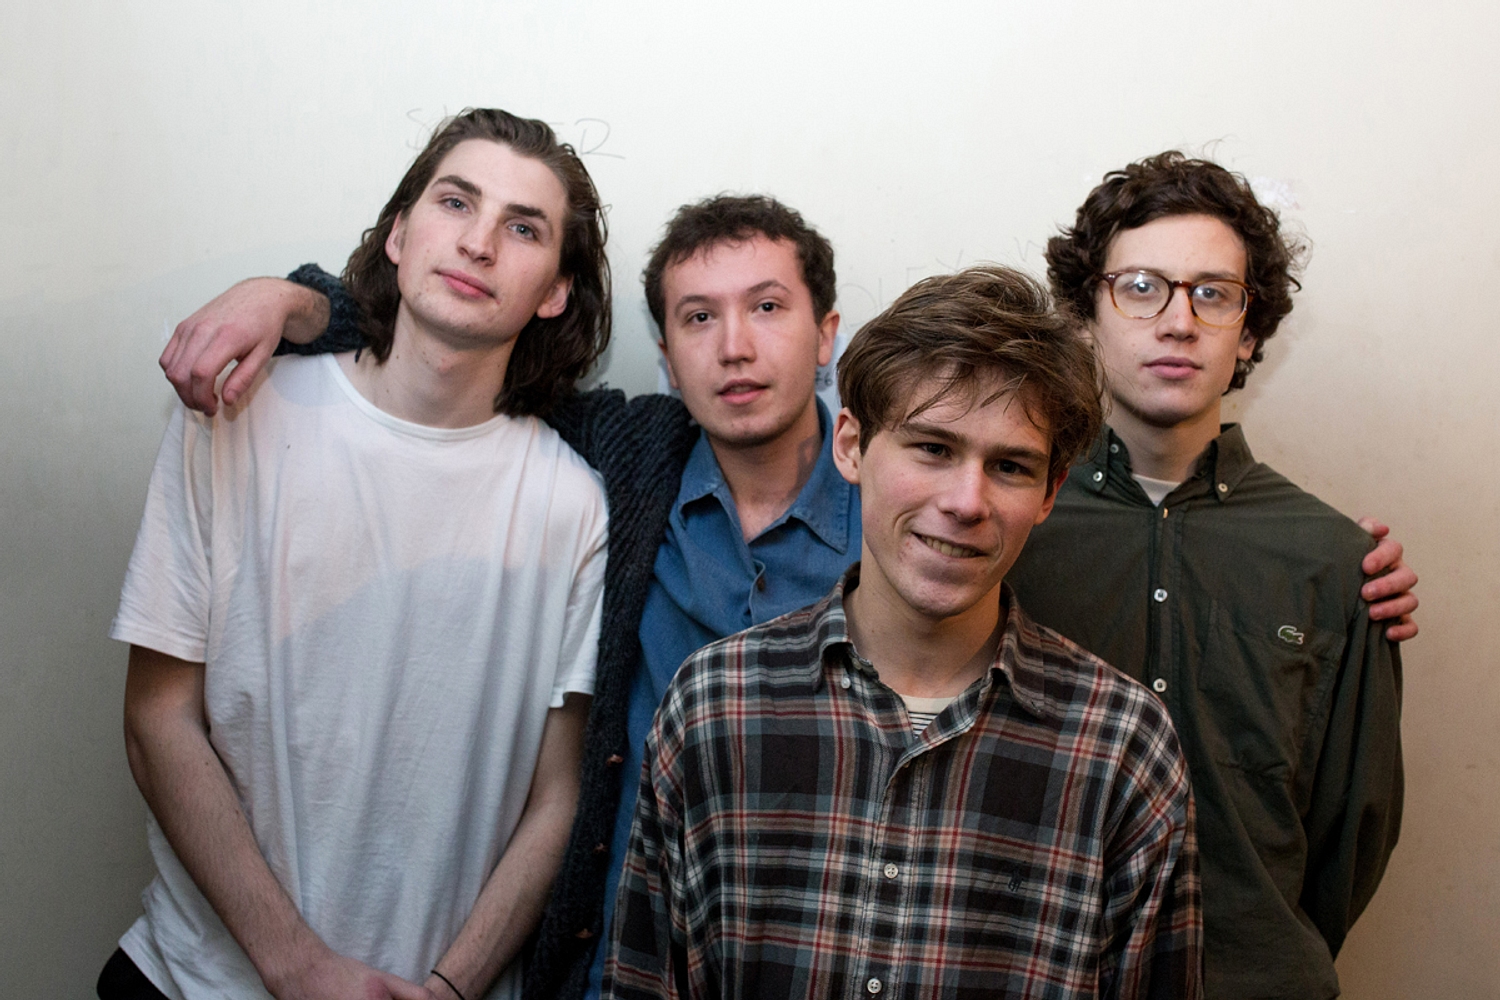 The Magic Gang: "We try and make people smile"